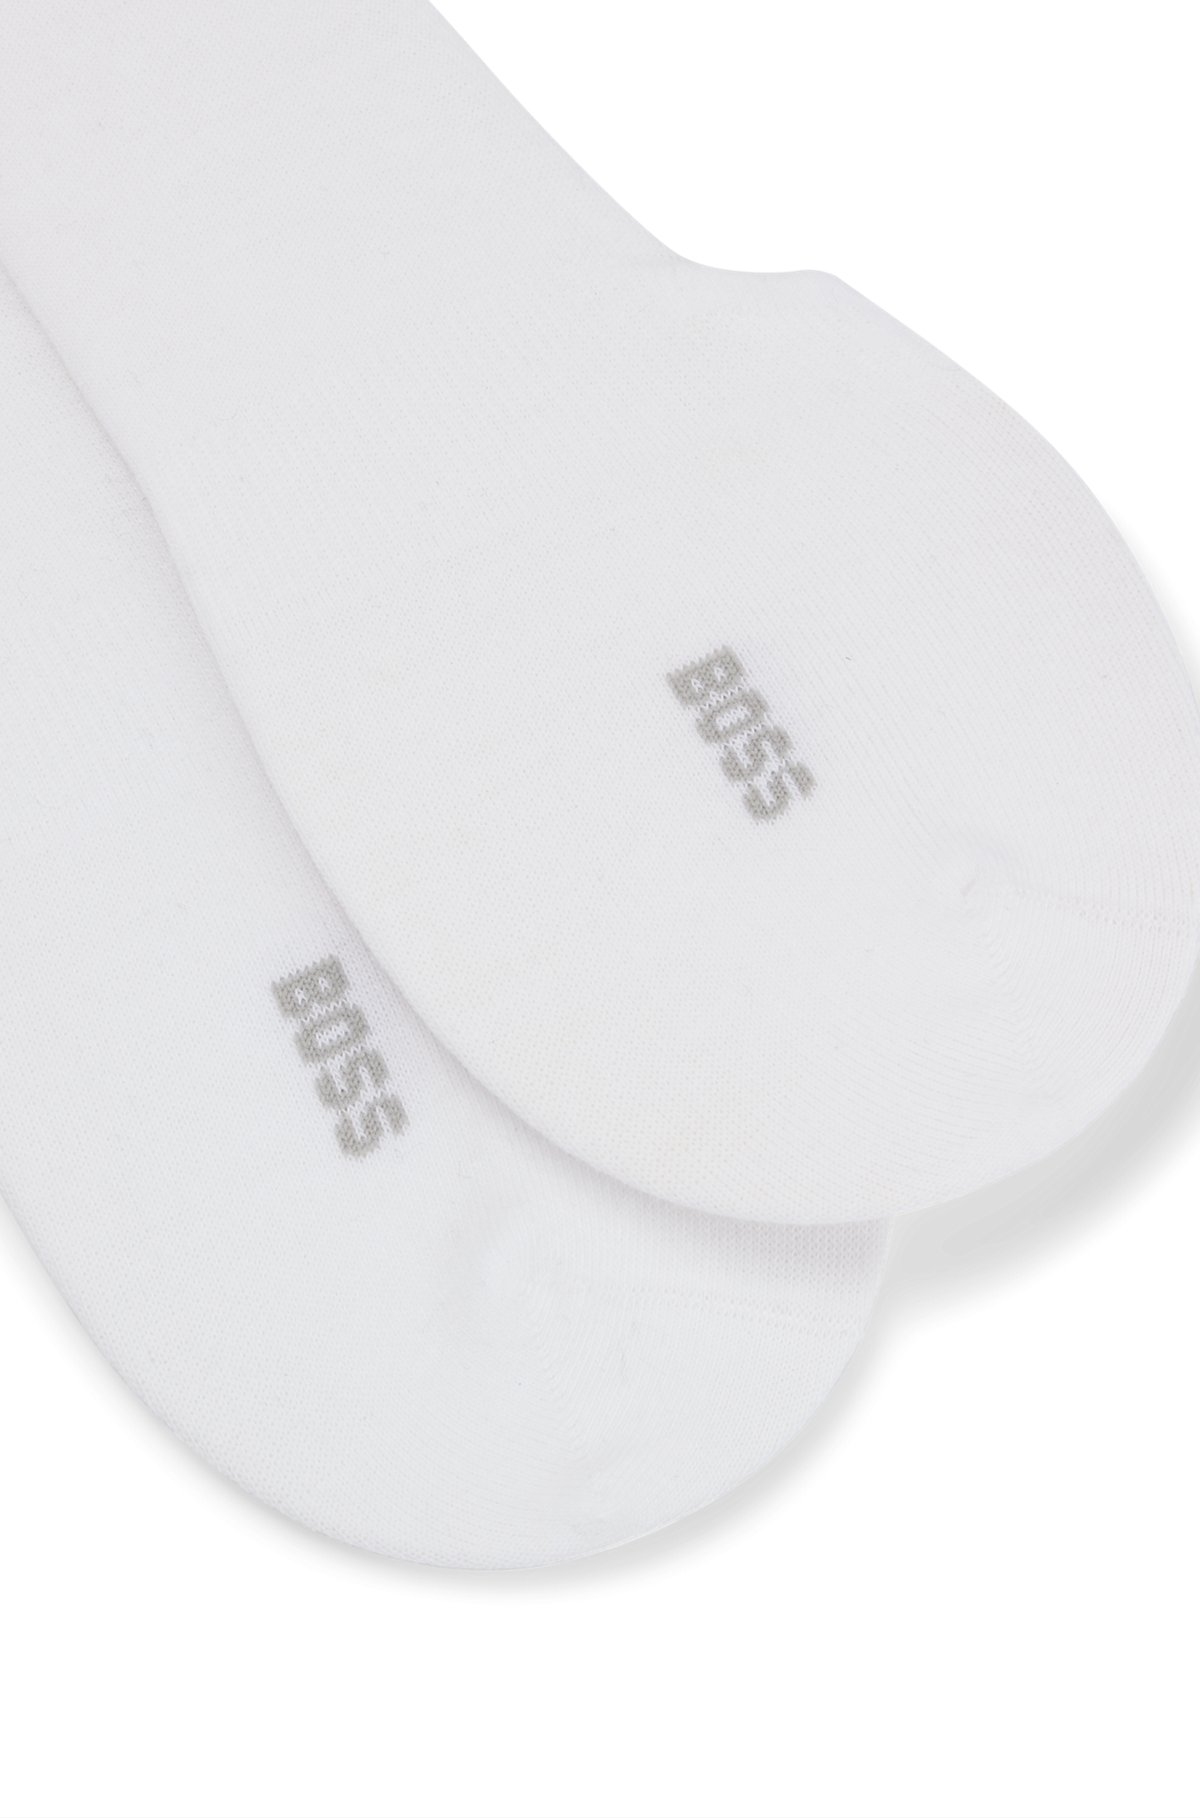 Two-pack of invisible socks in a cotton blend, White